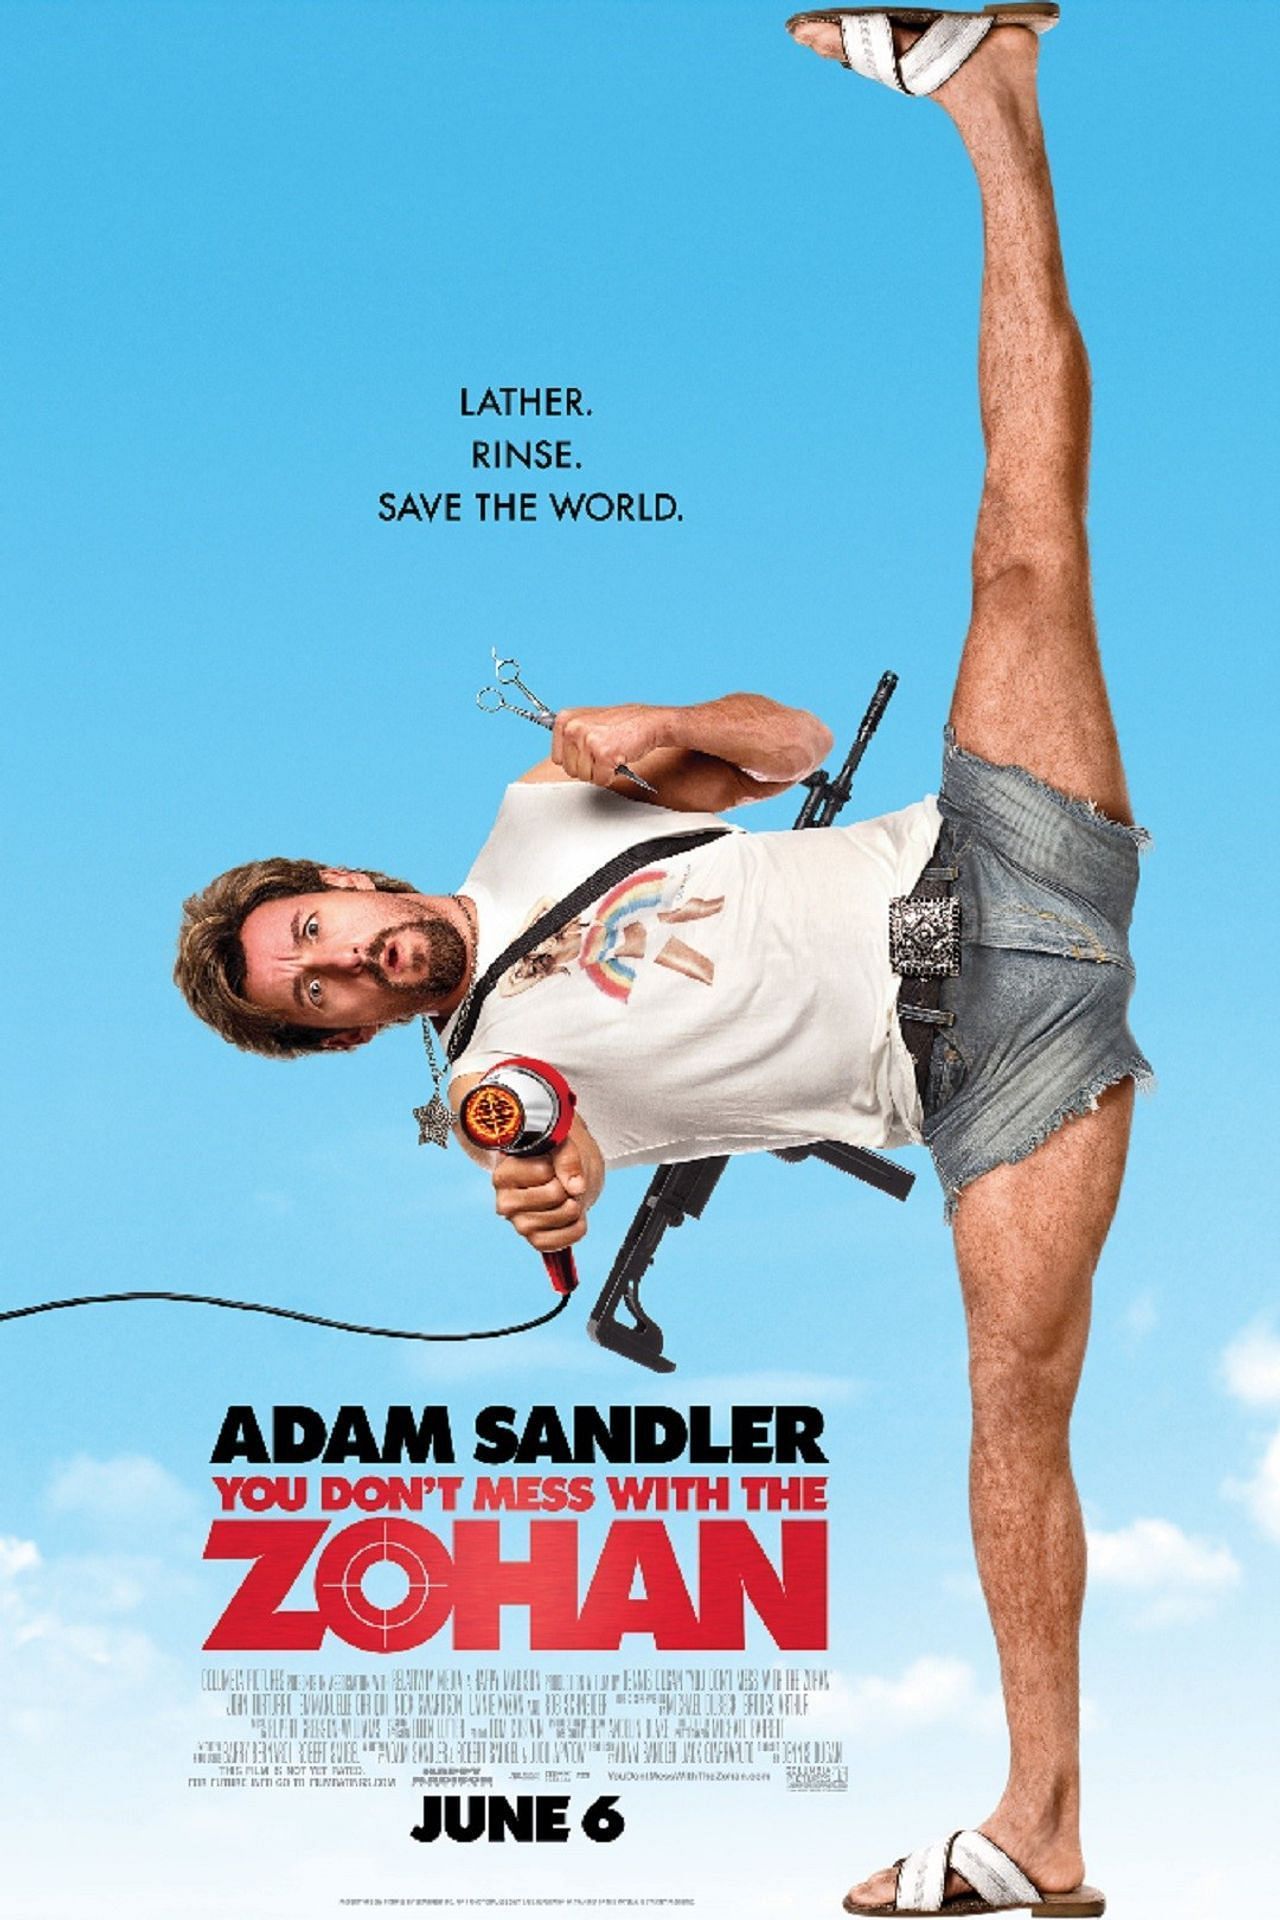 You Don&#039;t Mess With the Zohan, 2008 (Image via Columbia Pictures)